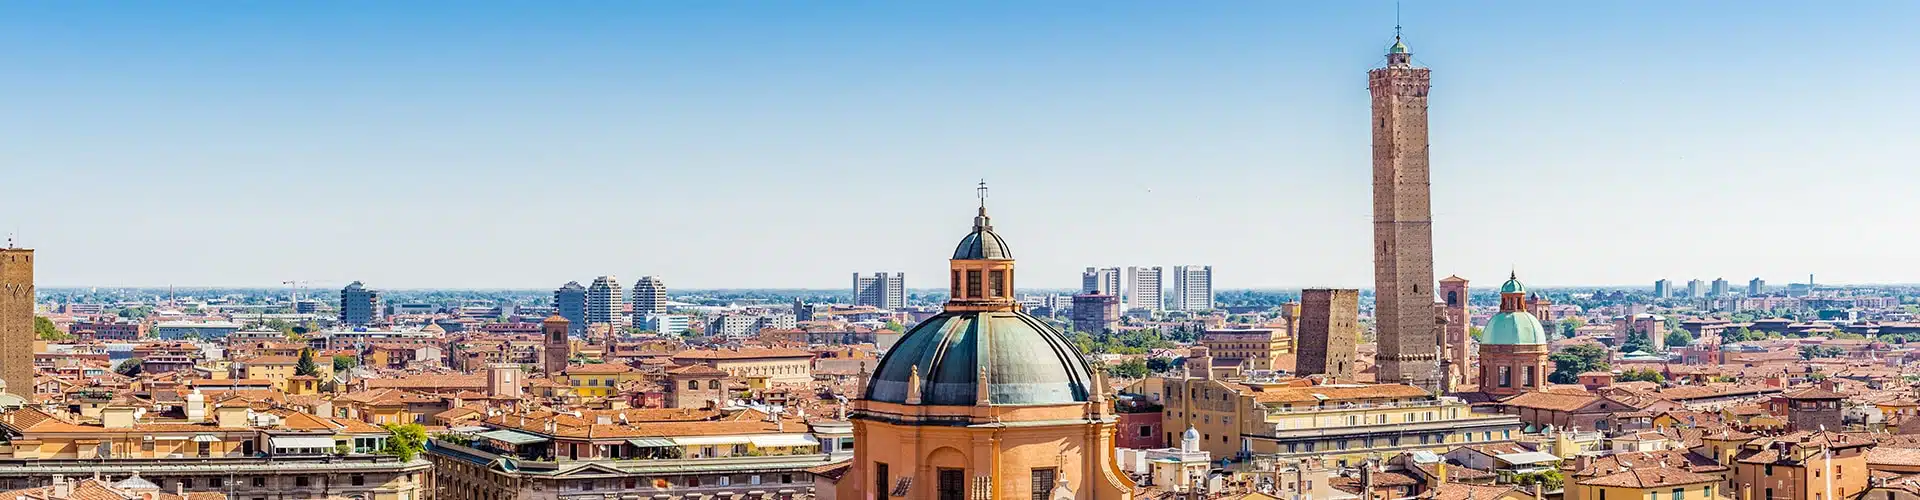 View over the roofs of the medieval city of Bologna in Italy